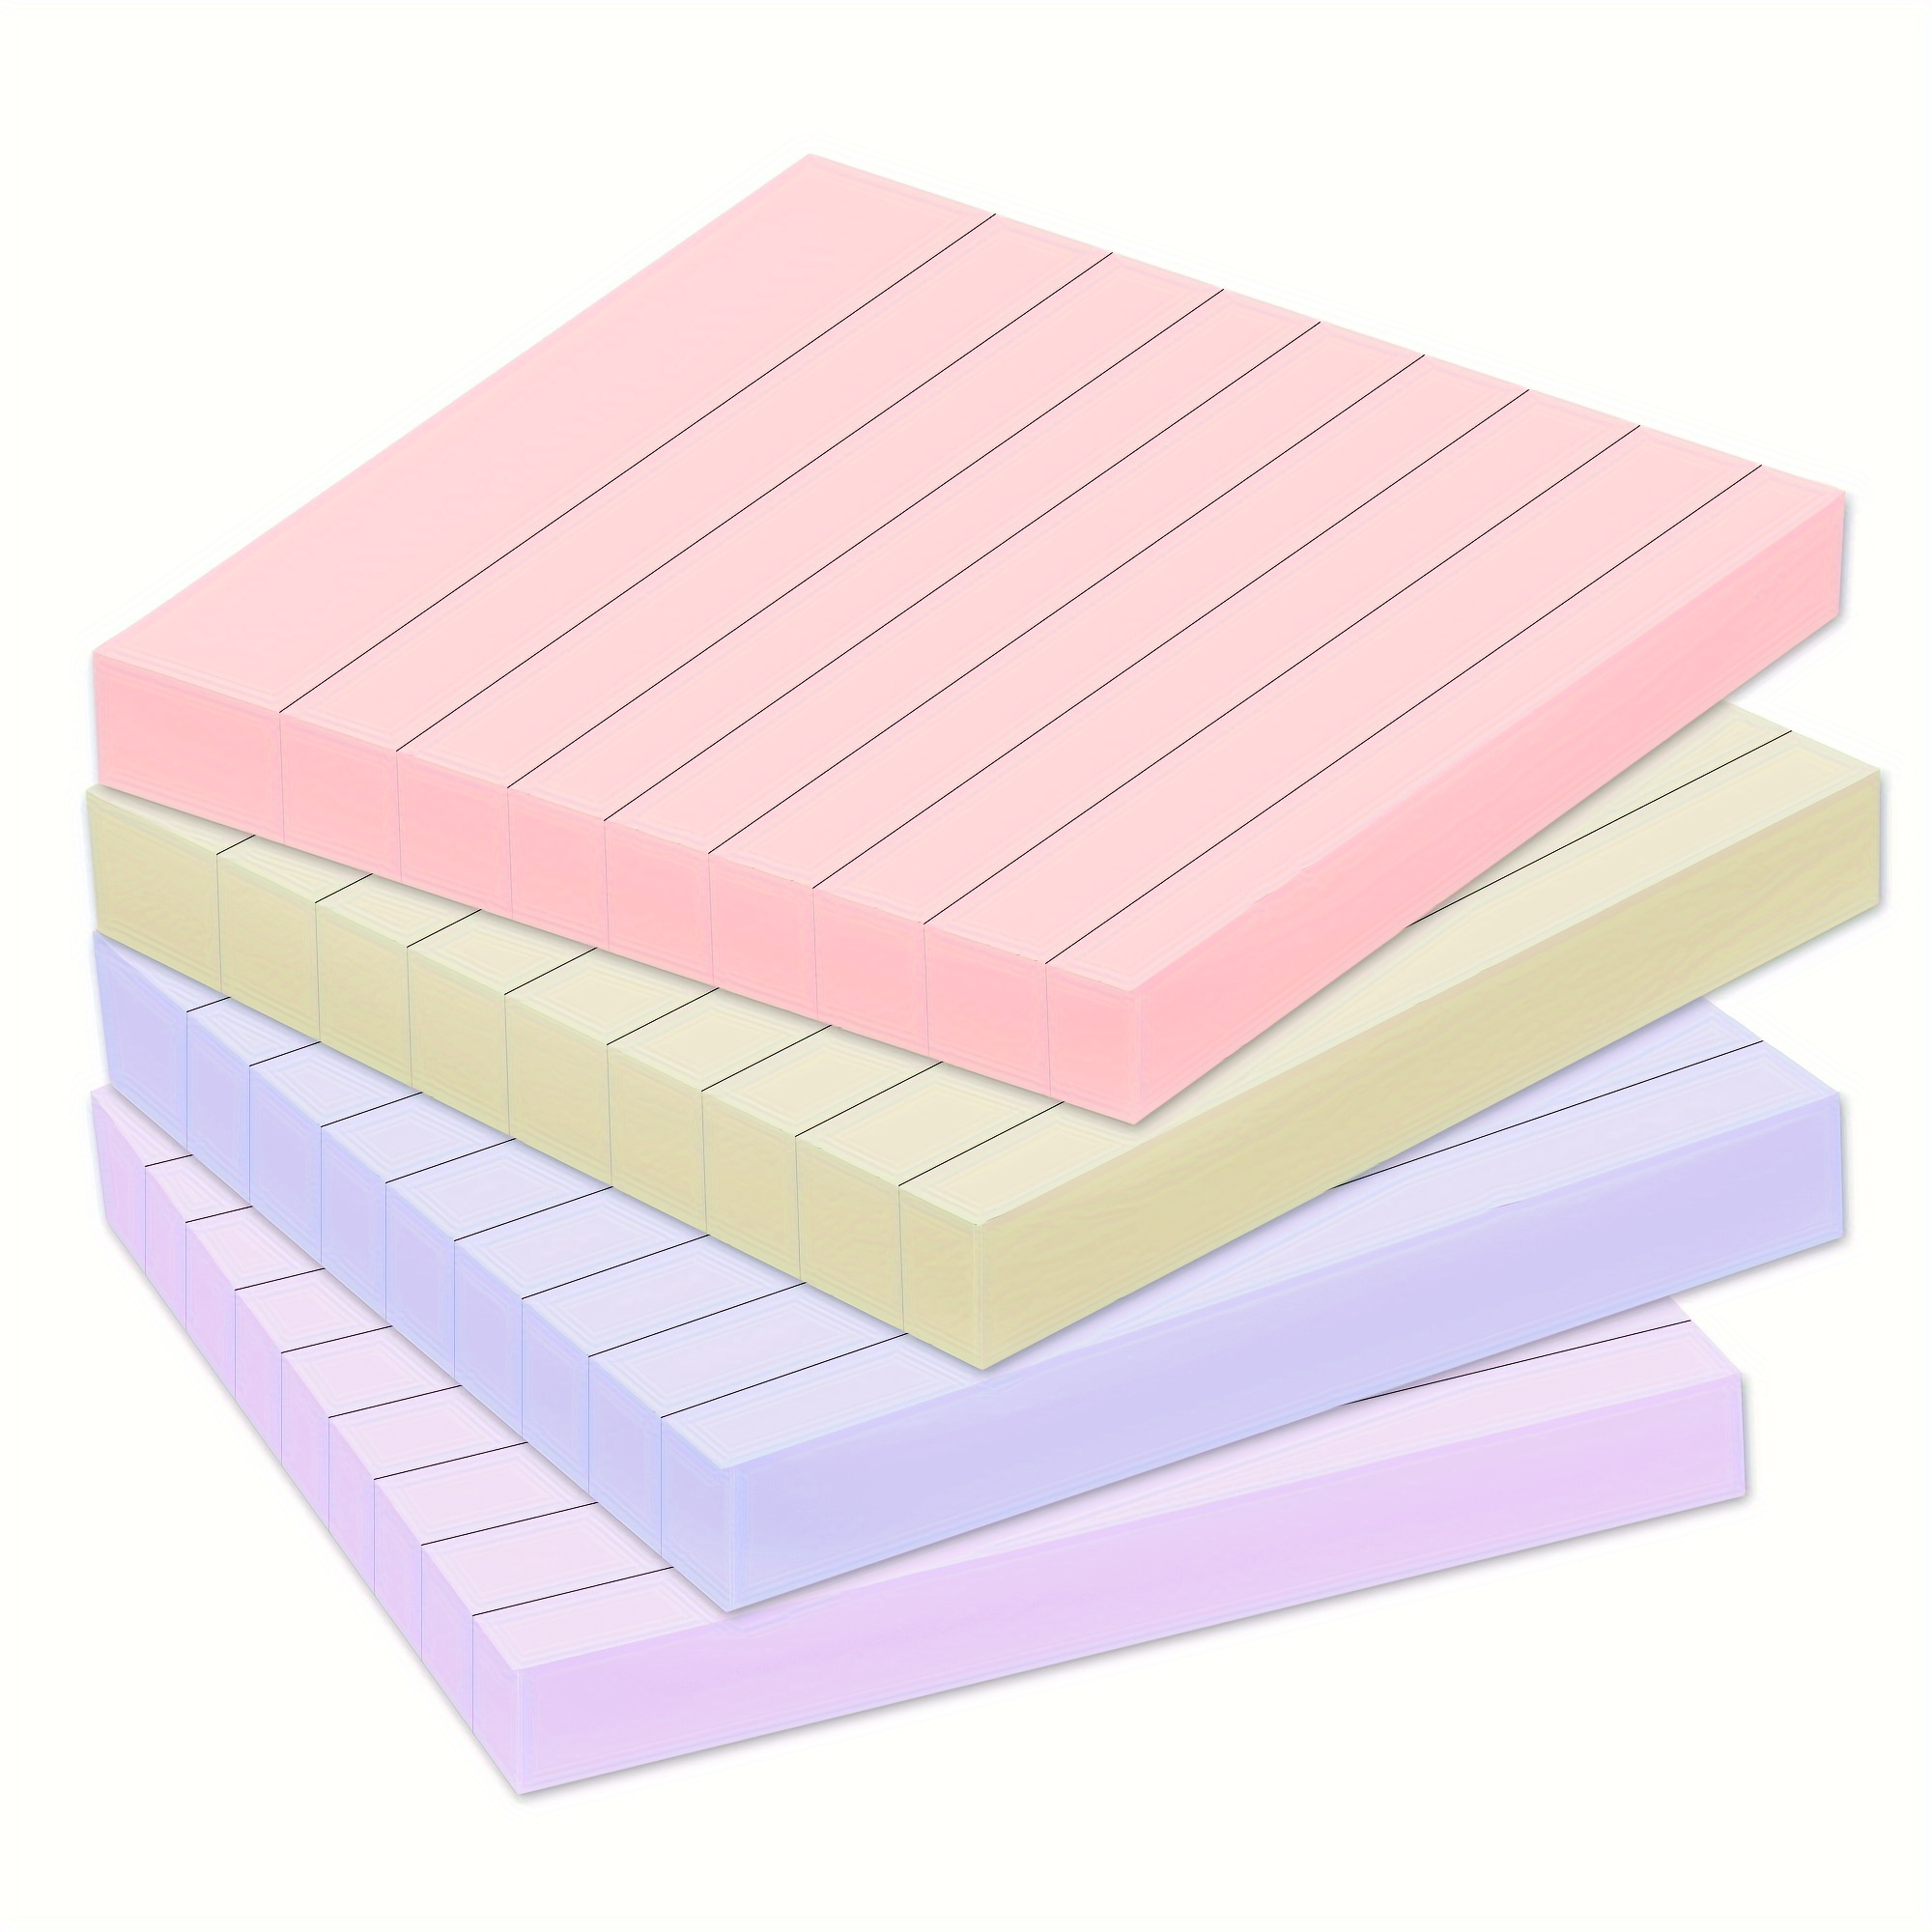 

Lined Sticky Notes 3x3 Inch - 4 Pads Pastel Colored Self-stick Memo Pads With Strong Adhesive - Super Sticky Ruled Sticky Notes For Reminders, Lists, And Organizing